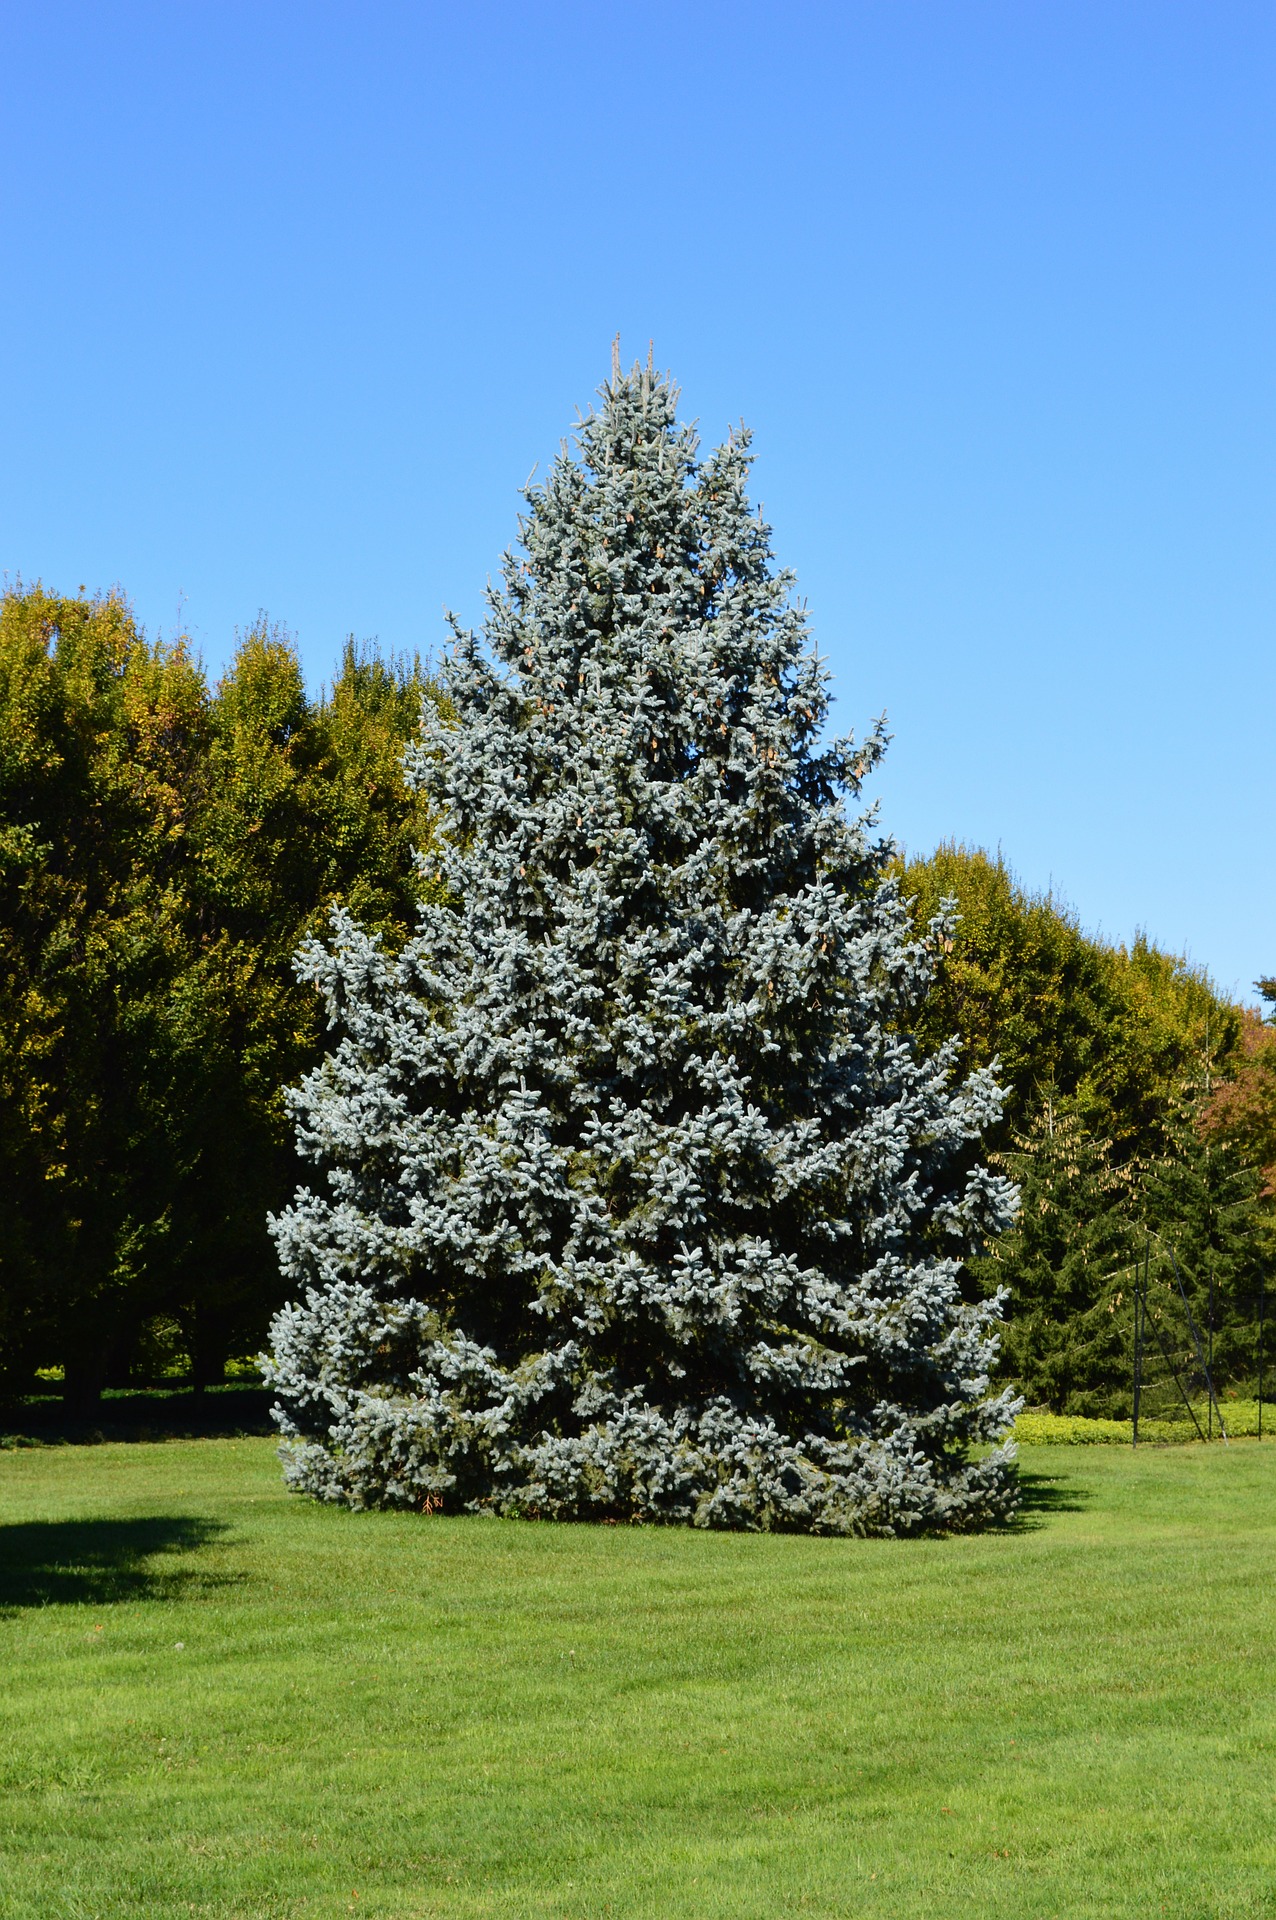 Spruces - Sometimes, one tree is enough. You don't need a row or a hedge, just a well-placed large tree to obscure an eyesore from either direction. Spruces fit nicely into that category.Zone: 2-8Size: 40'-60' x 10'-20' (Norway),10'-15 x 10'-15' (smaller blue spruces)Cultivars Suggested: 'Fat Albert', 'Baby Blue Eyes', Norway, OrientalCulture: Full sun, does not like wet feet, good wind screenGrowth rate: SlowPests and Diseases: Needle cast, canker, bagworms*Colorado Blue Spruce pictured